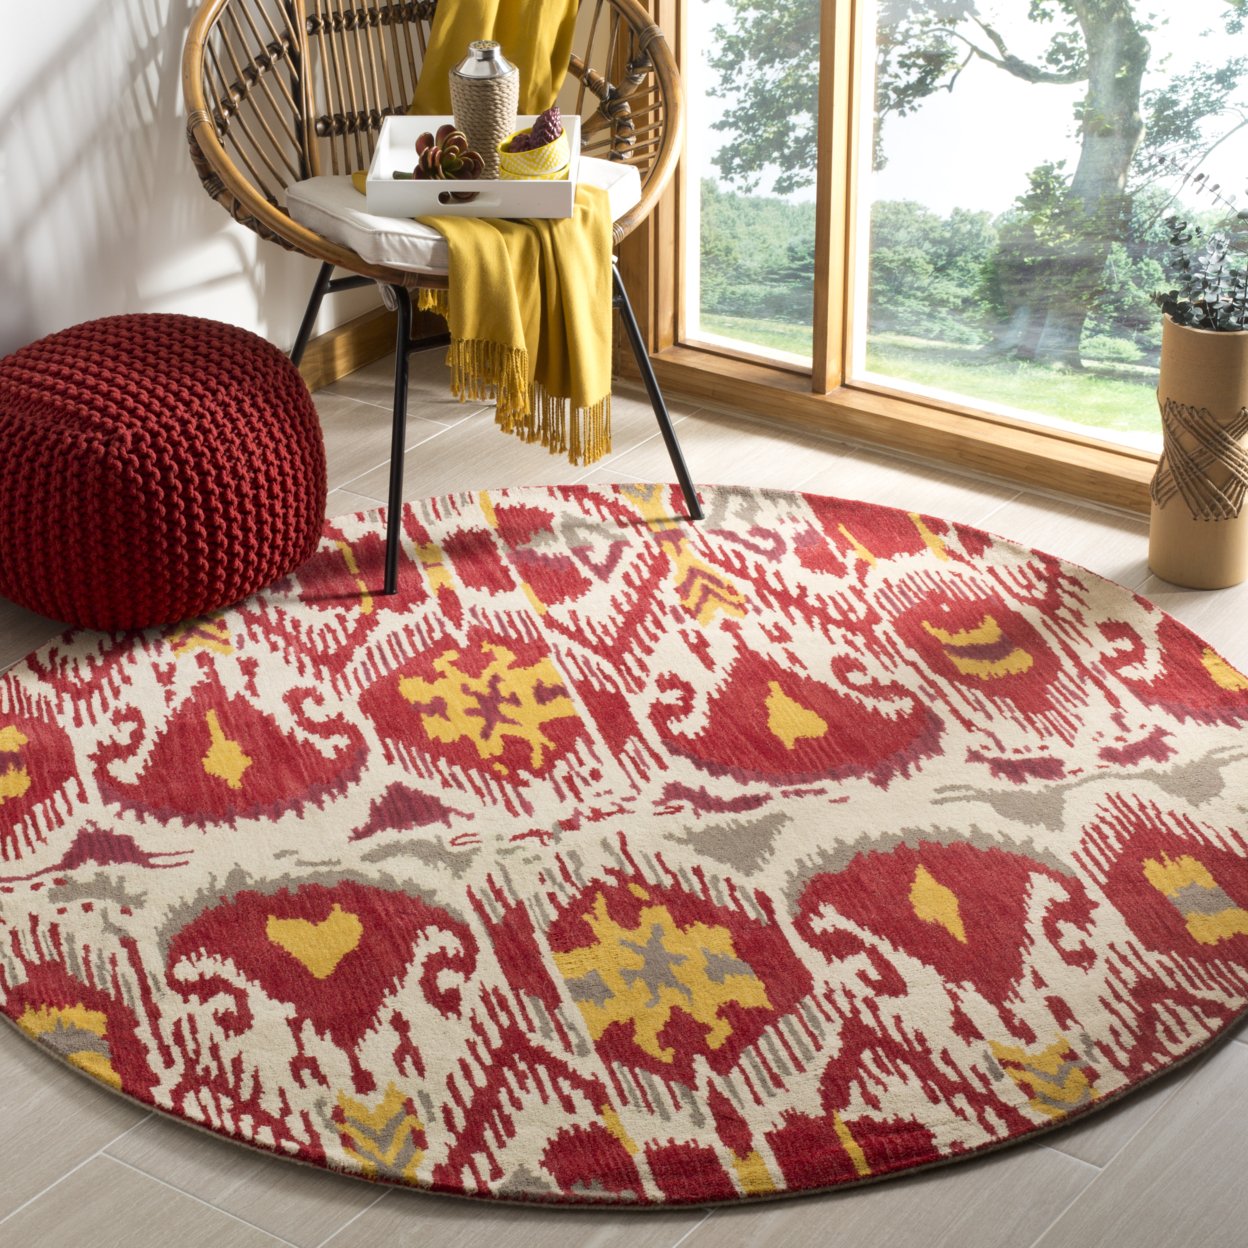 SAFAVIEH Ikat Collection IKT226A Handmade Ivory / Red Rug - 6' Round